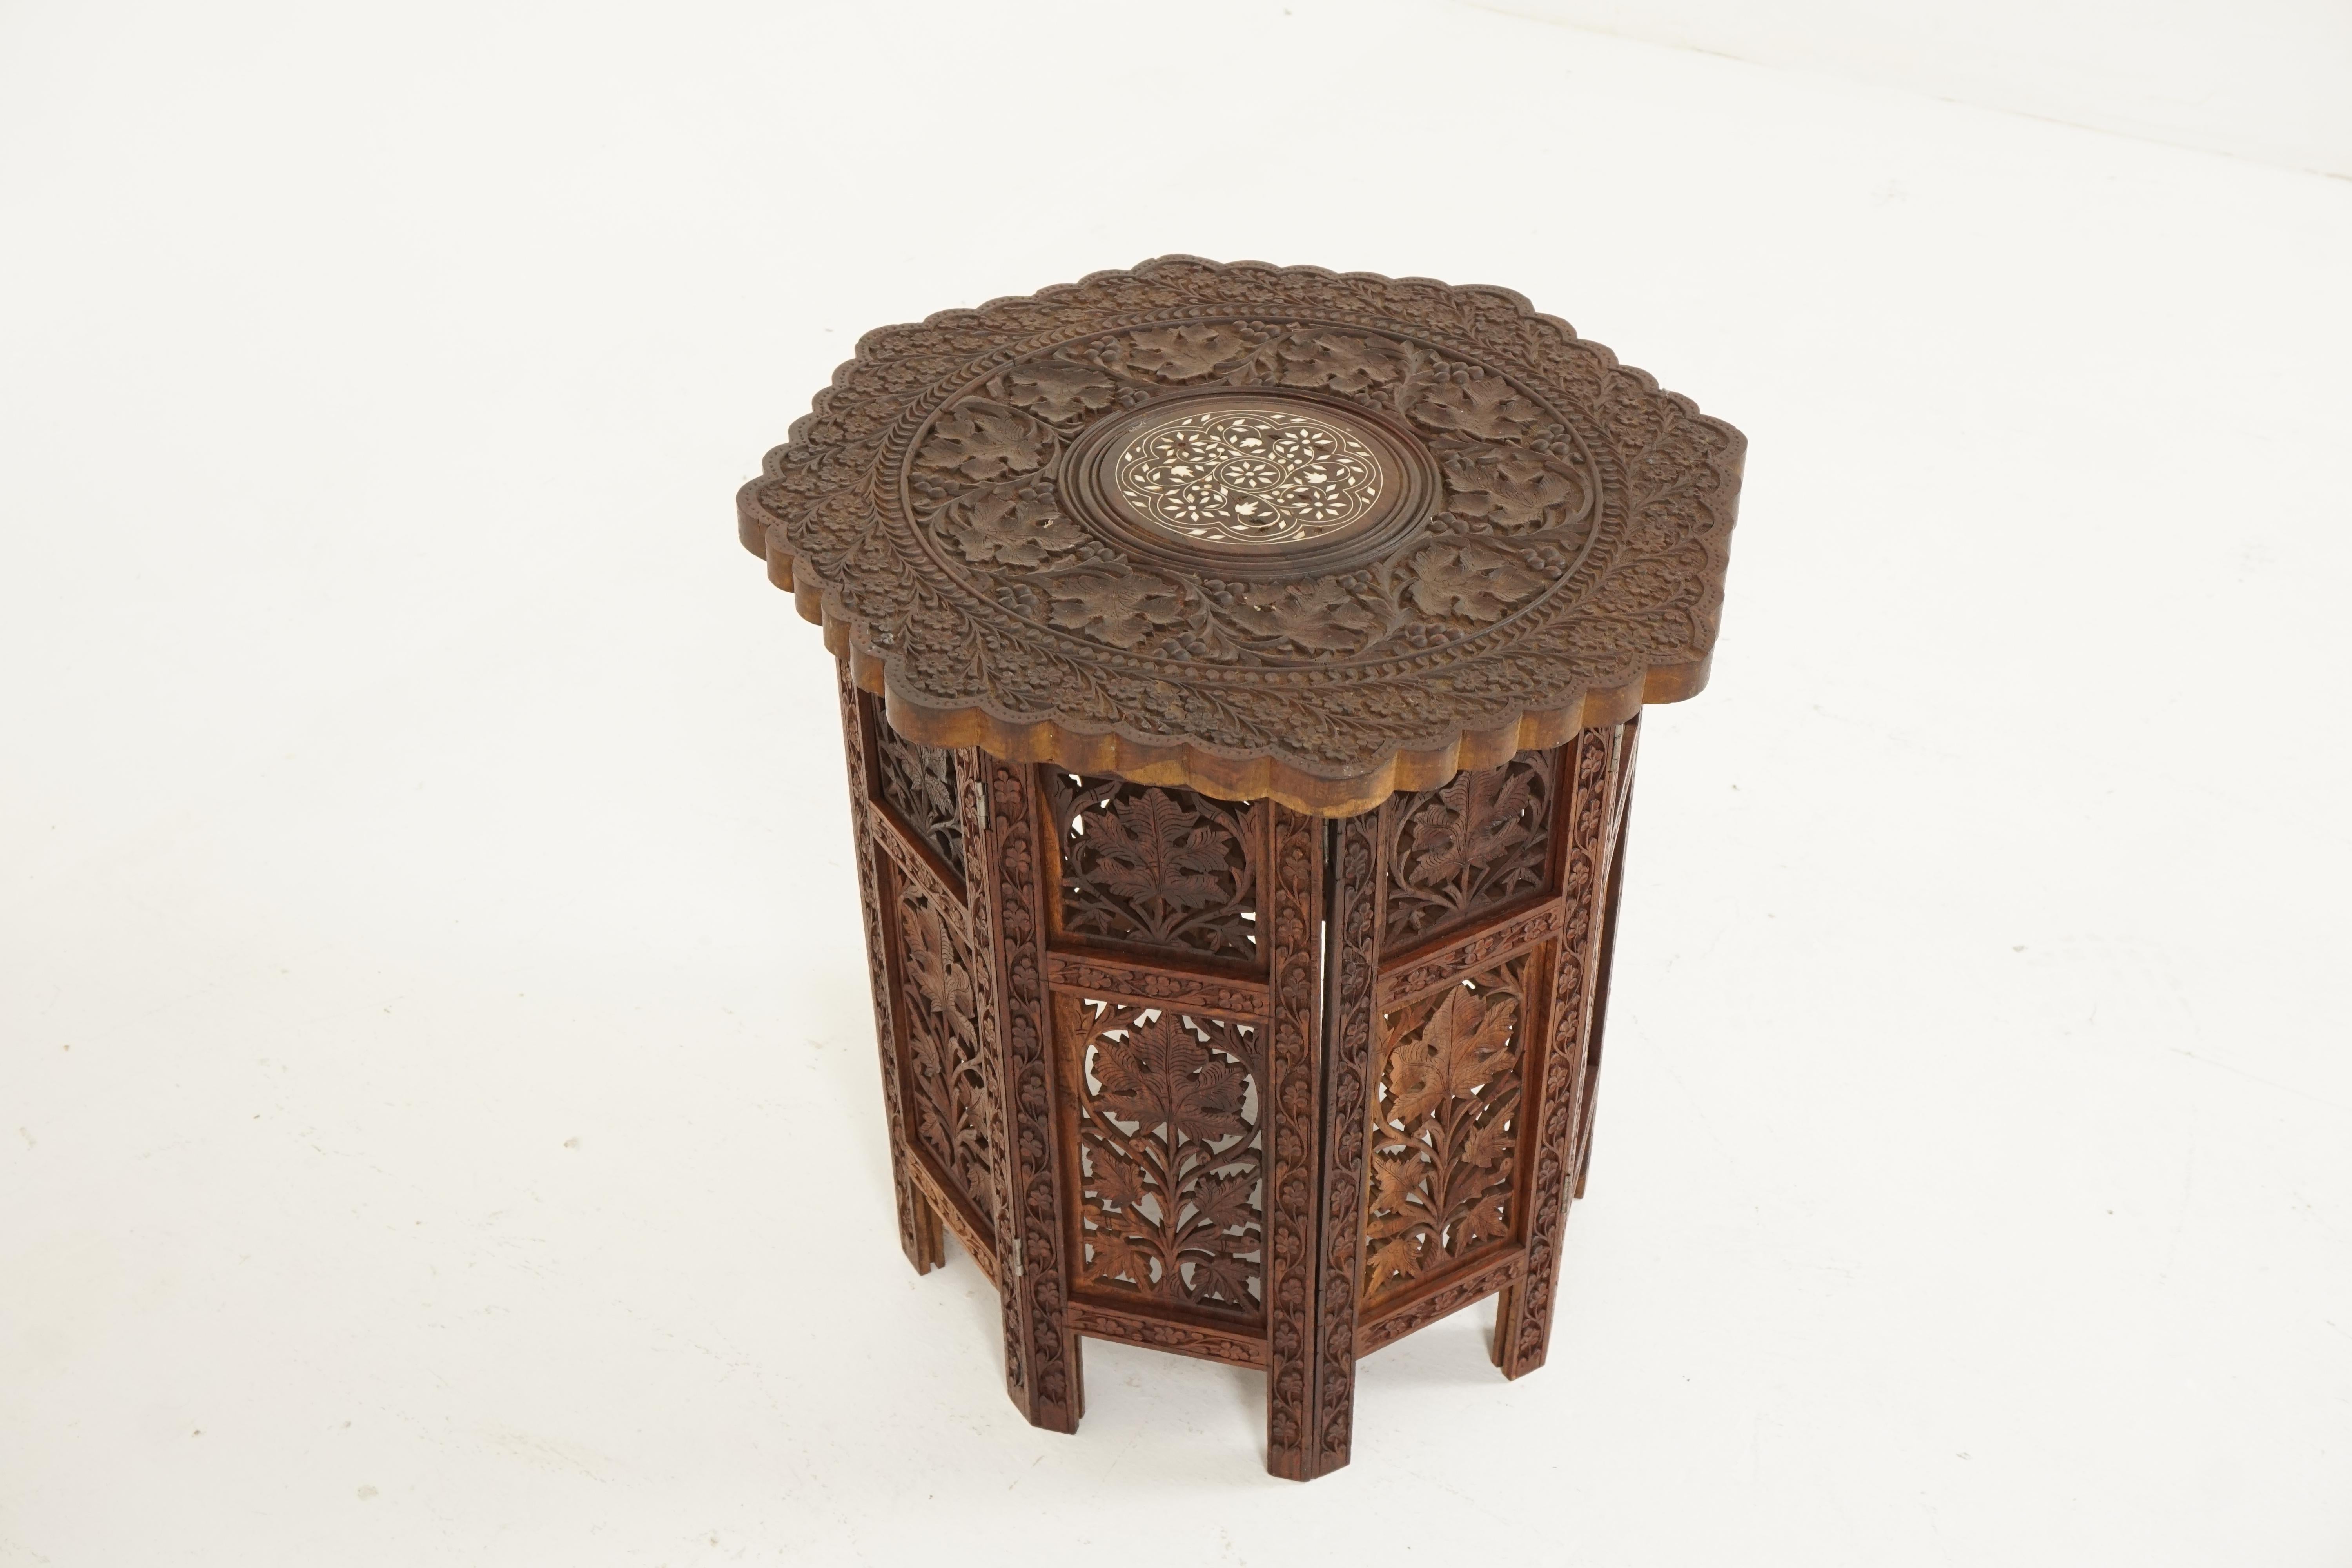 Antique teak table, carved Campaign table, inlaid table, India, 1920s

India 1920s
Solid teak
Original finish
Octagonal top with bone inlay
Pierce carved fretwork with foliate detail
Dismantles into folding legs
Solid teak construction
Nice